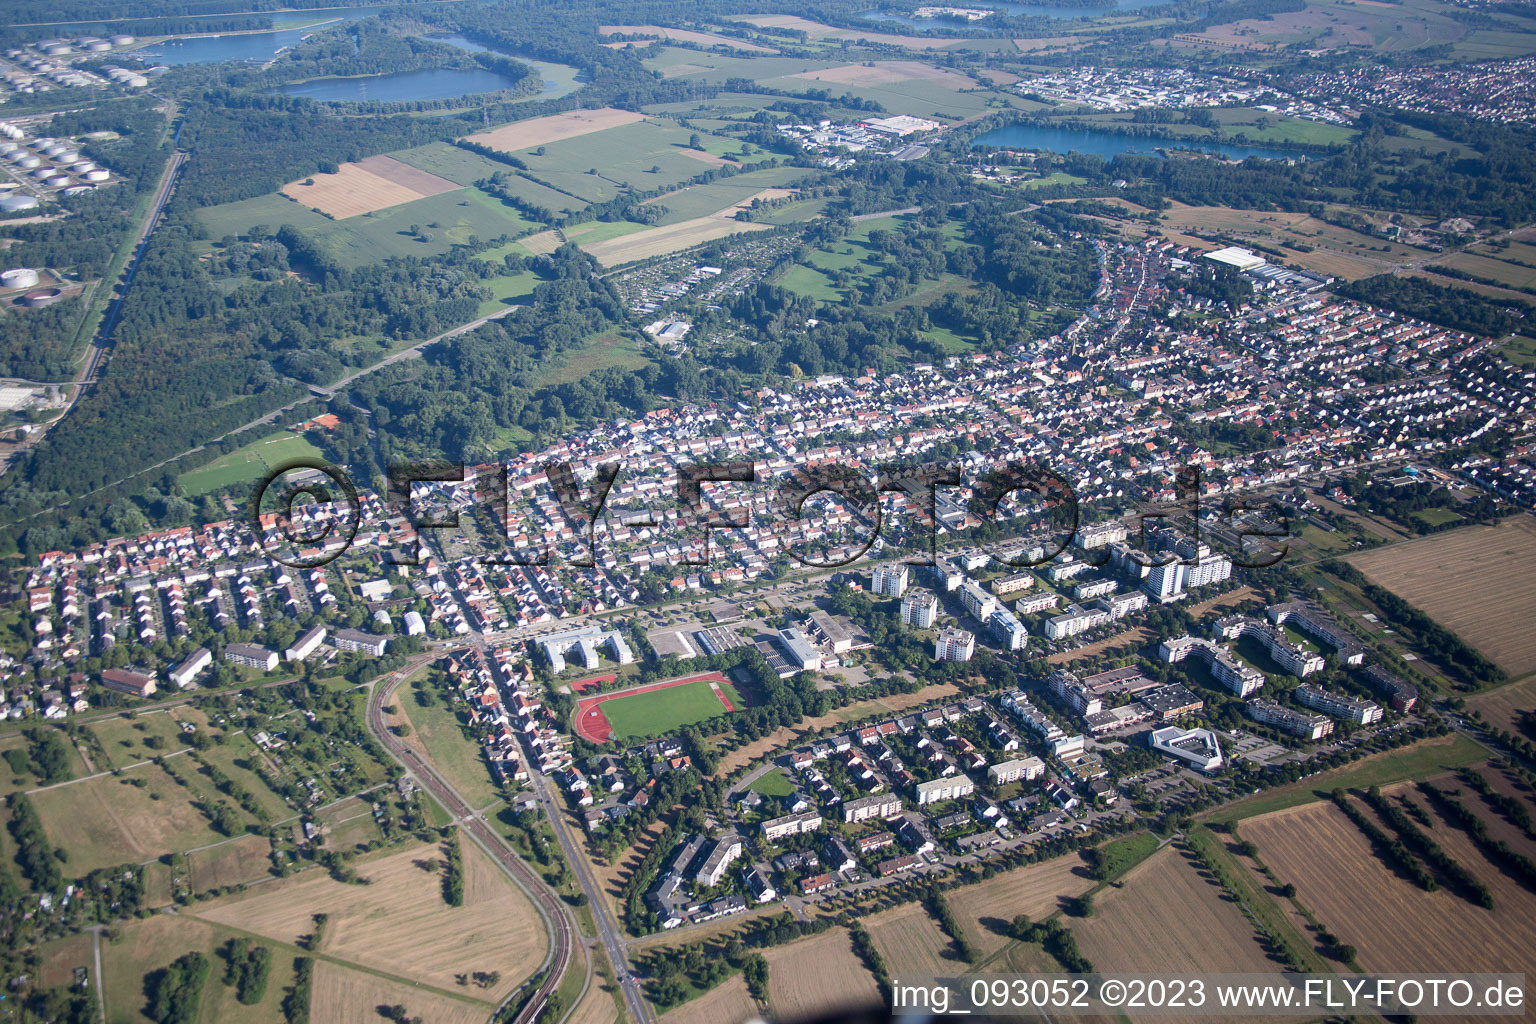 District Neureut in Karlsruhe in the state Baden-Wuerttemberg, Germany seen from a drone